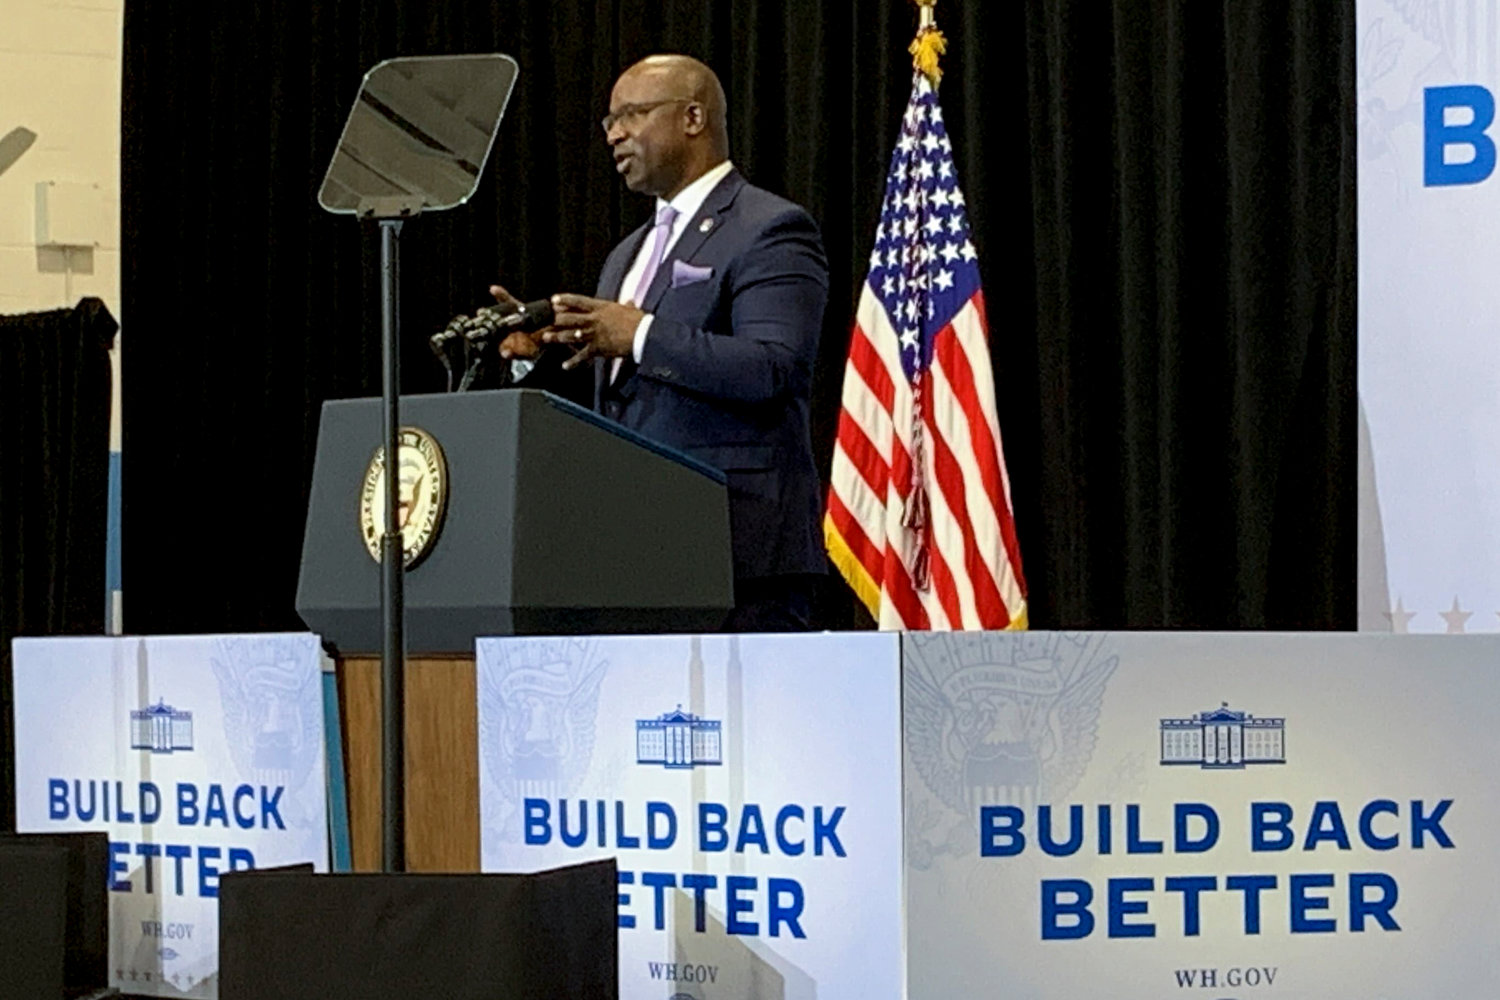 U.S. Rep. Jamaal Bowman found common ground early with Vice President Kamala Harris over their passionate drive to help children grow up in healthier communities. That has created a solid working bond between the two, and was what Bowman believes was likely the driving force bringing Harris to the Bronx in the first place last week.